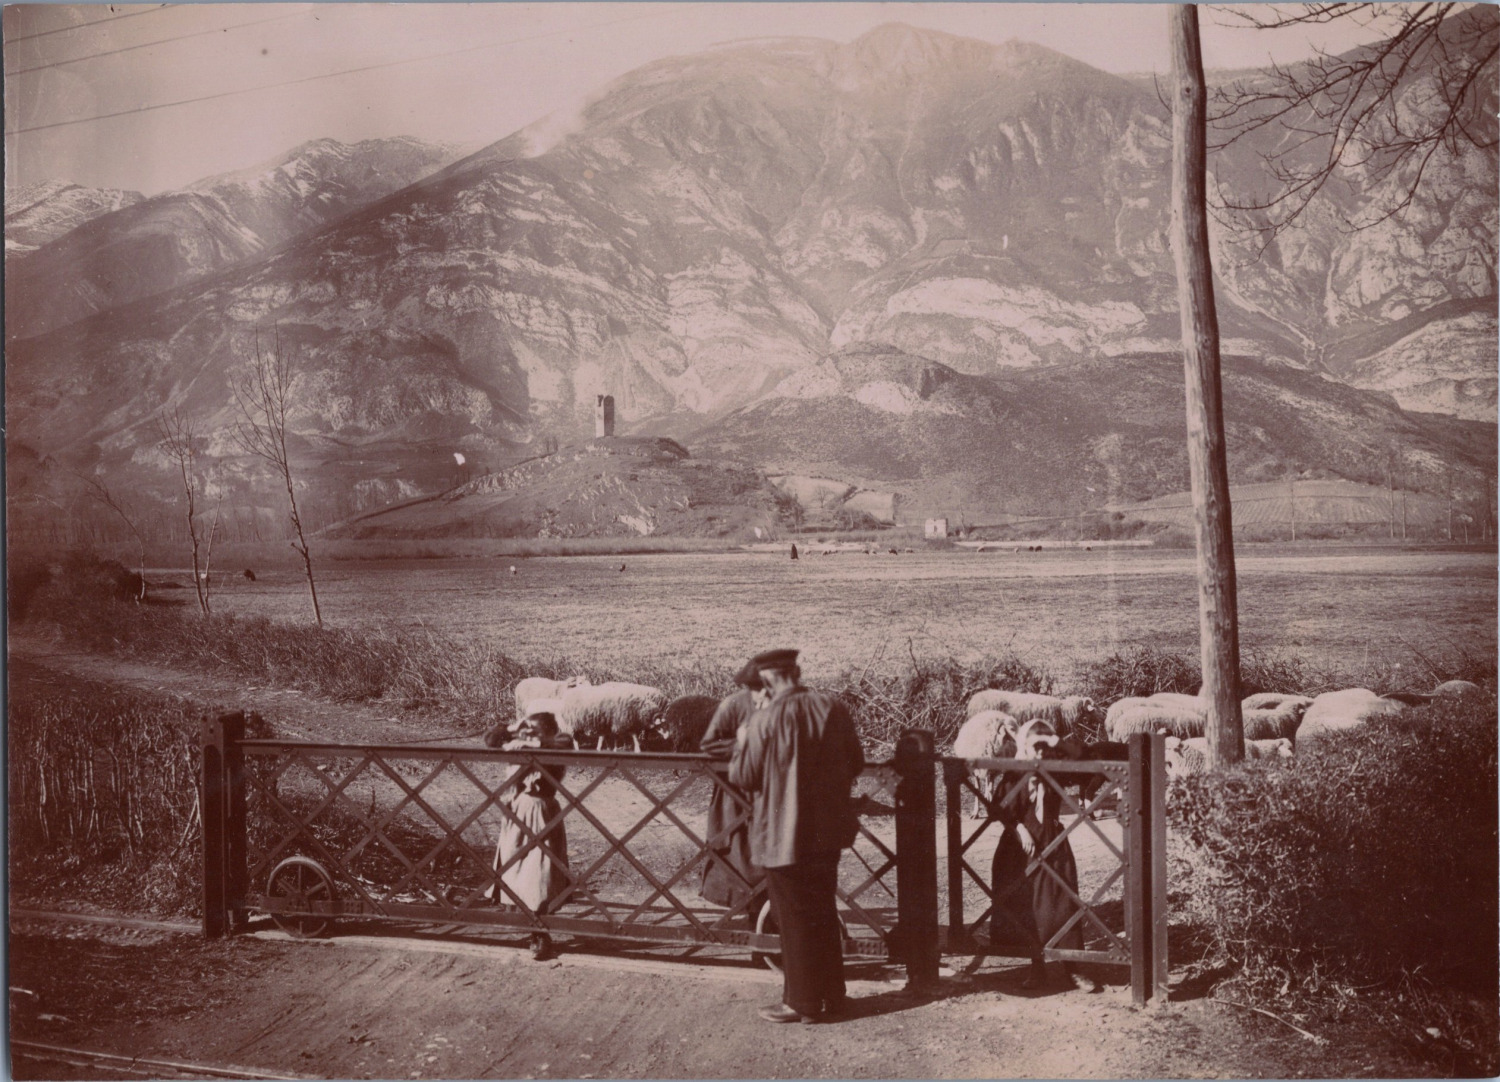 France, Berger and his herd at the foot of the mountains, vintage print, ca.1890 shot